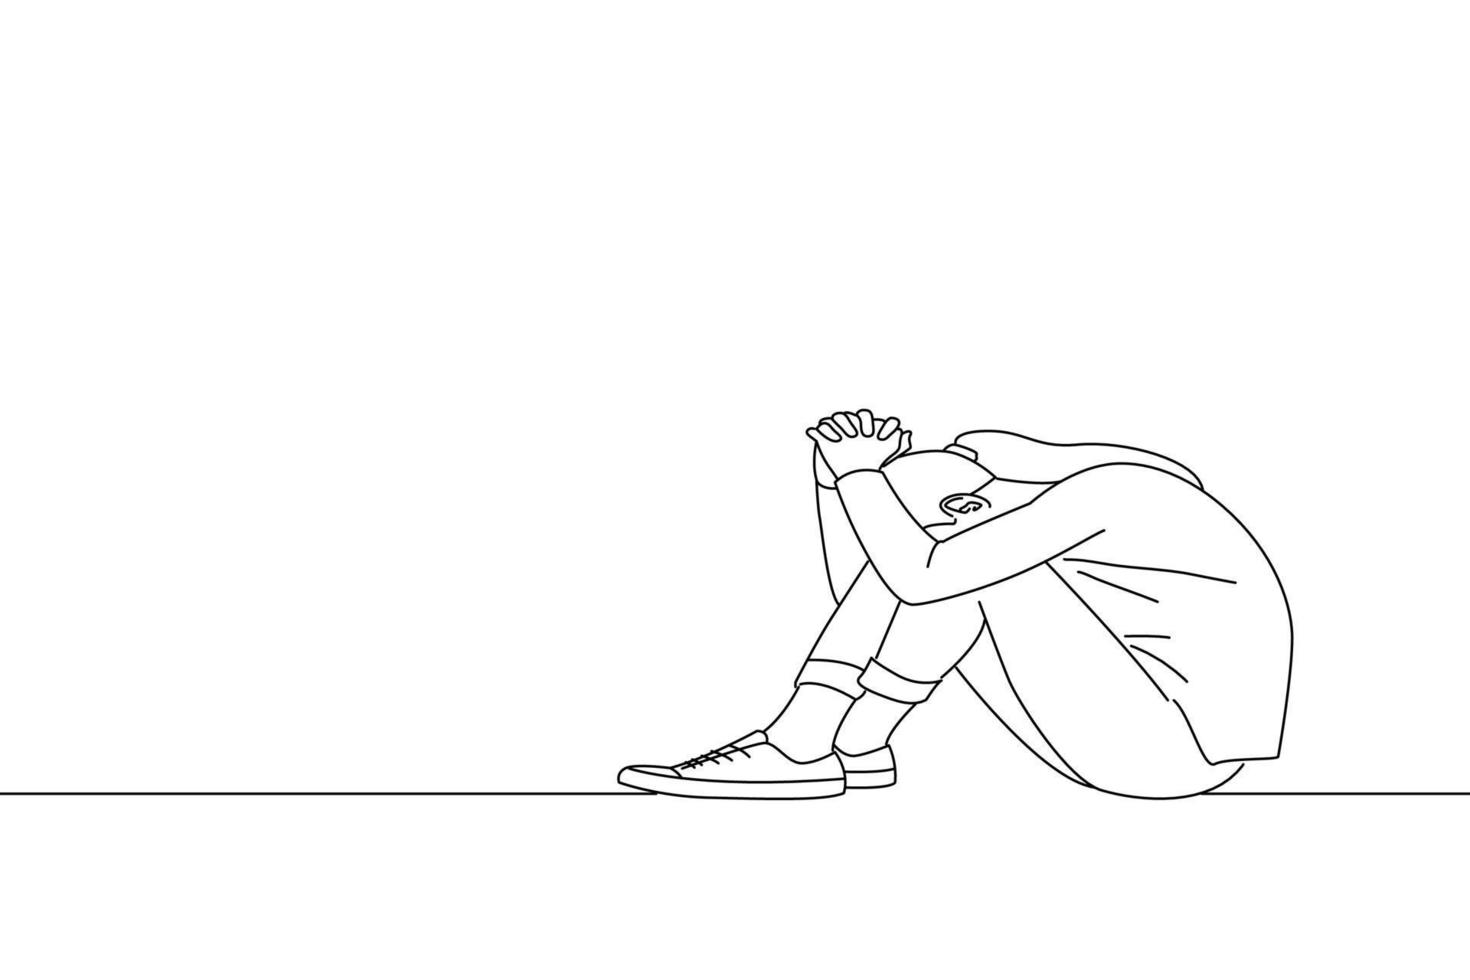 Cartoon of depressed sad teen girl sit on sill crying alone at home, upset desperate. Oneline art drawing style vector